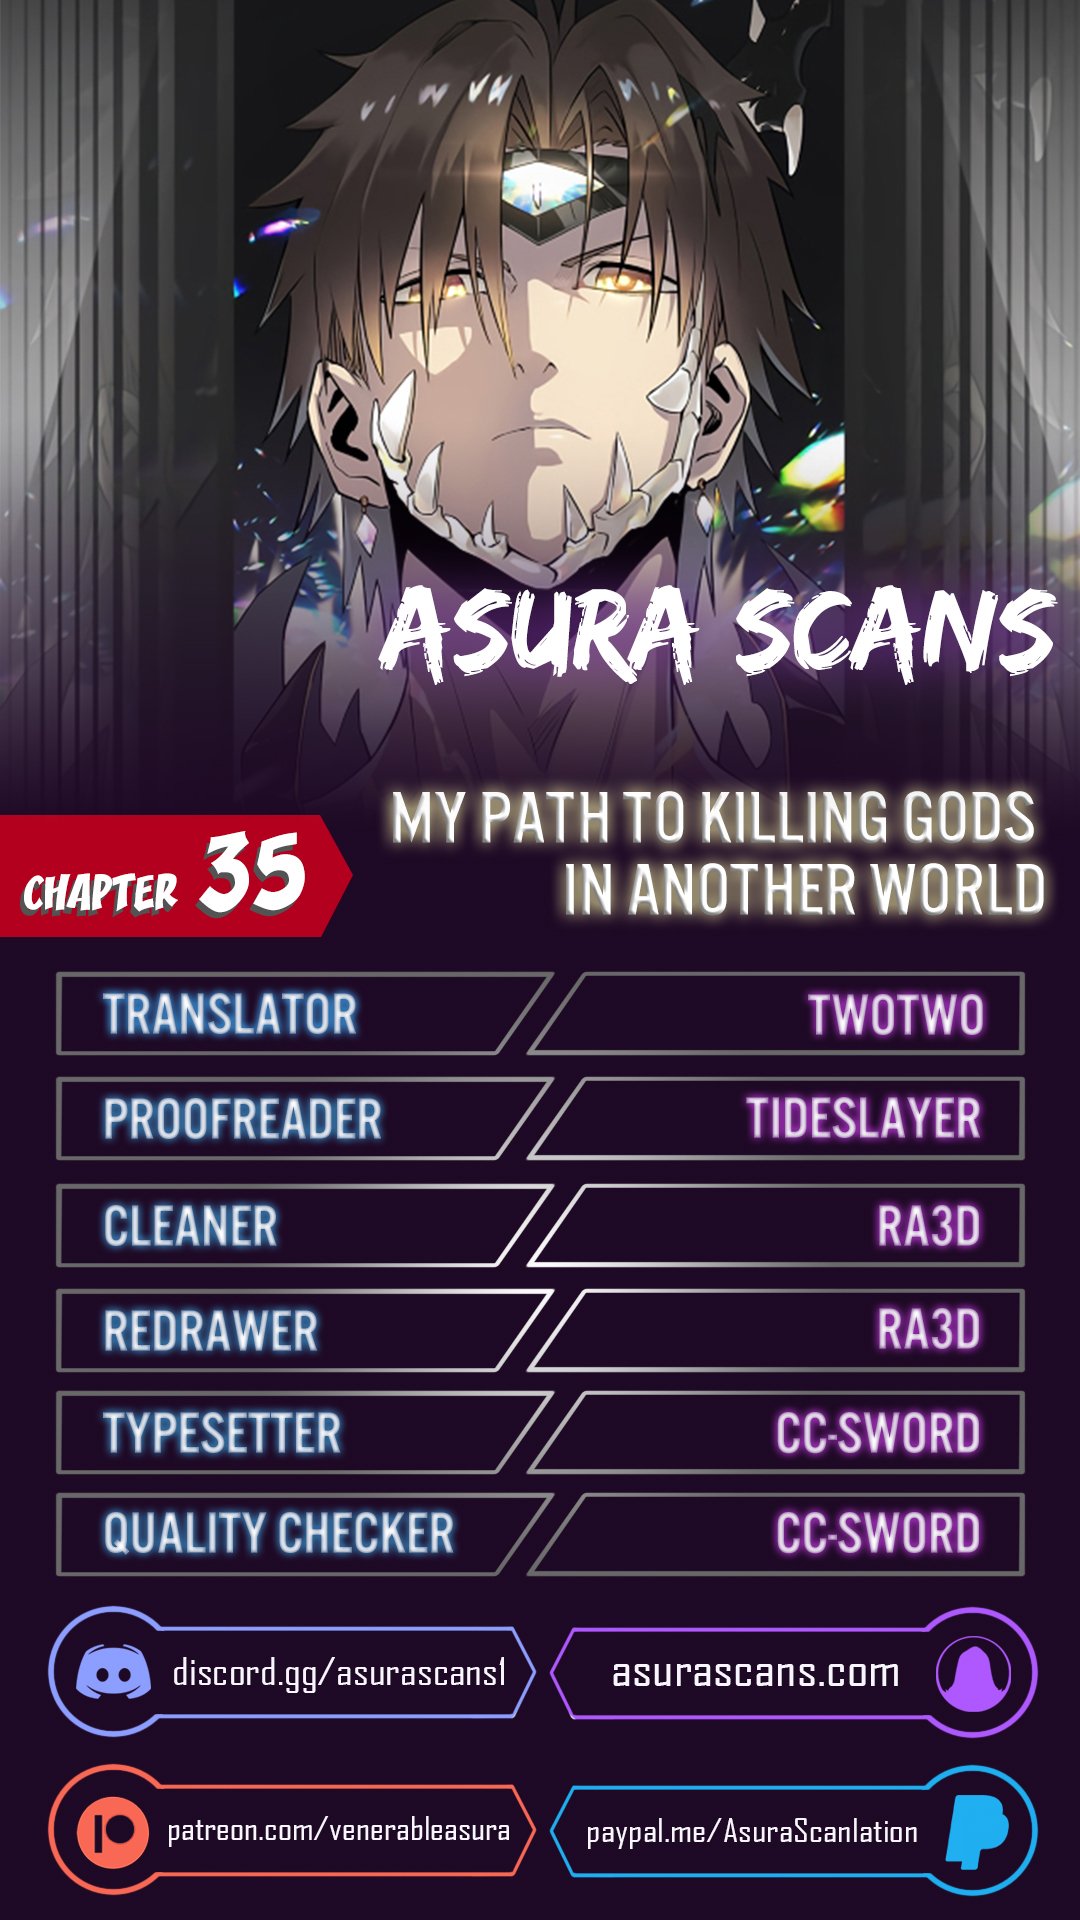 My Path to Killing Gods in Another World - Chapter 23186 - Image 1